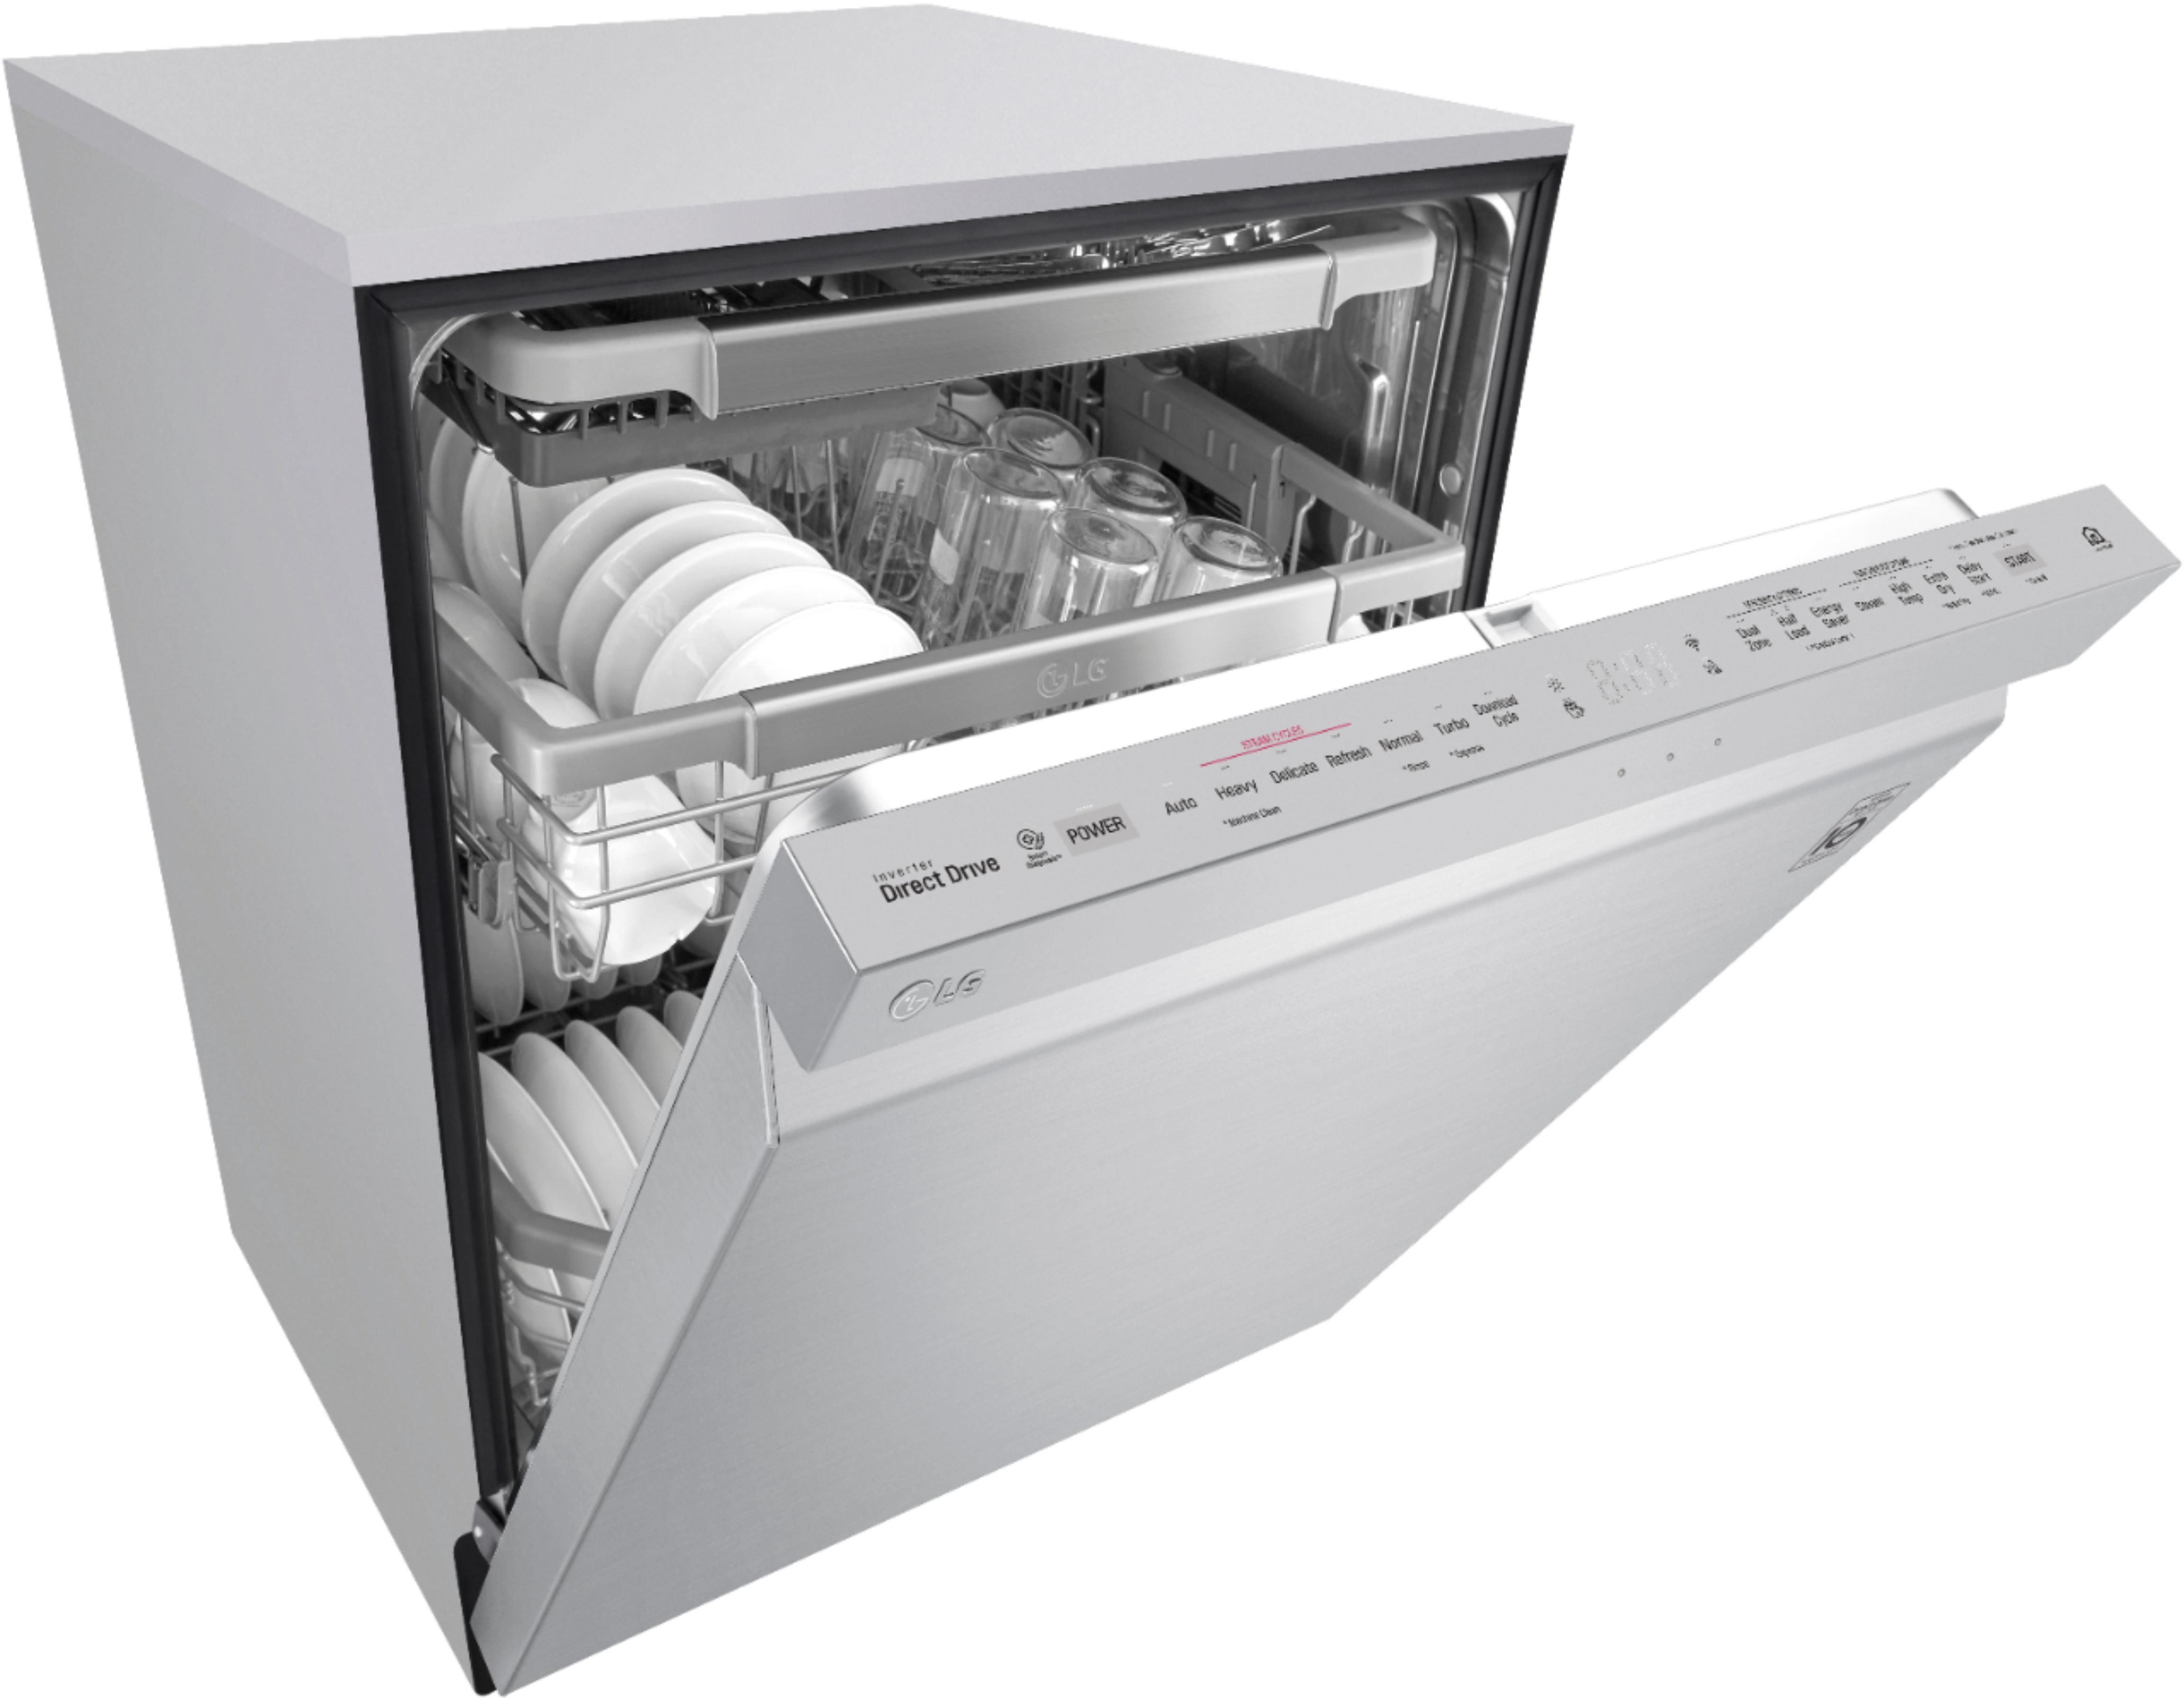 Angle View: LG - 24" Top Control Built-In Dishwasher with Stainless Steel Tub - Stainless steel